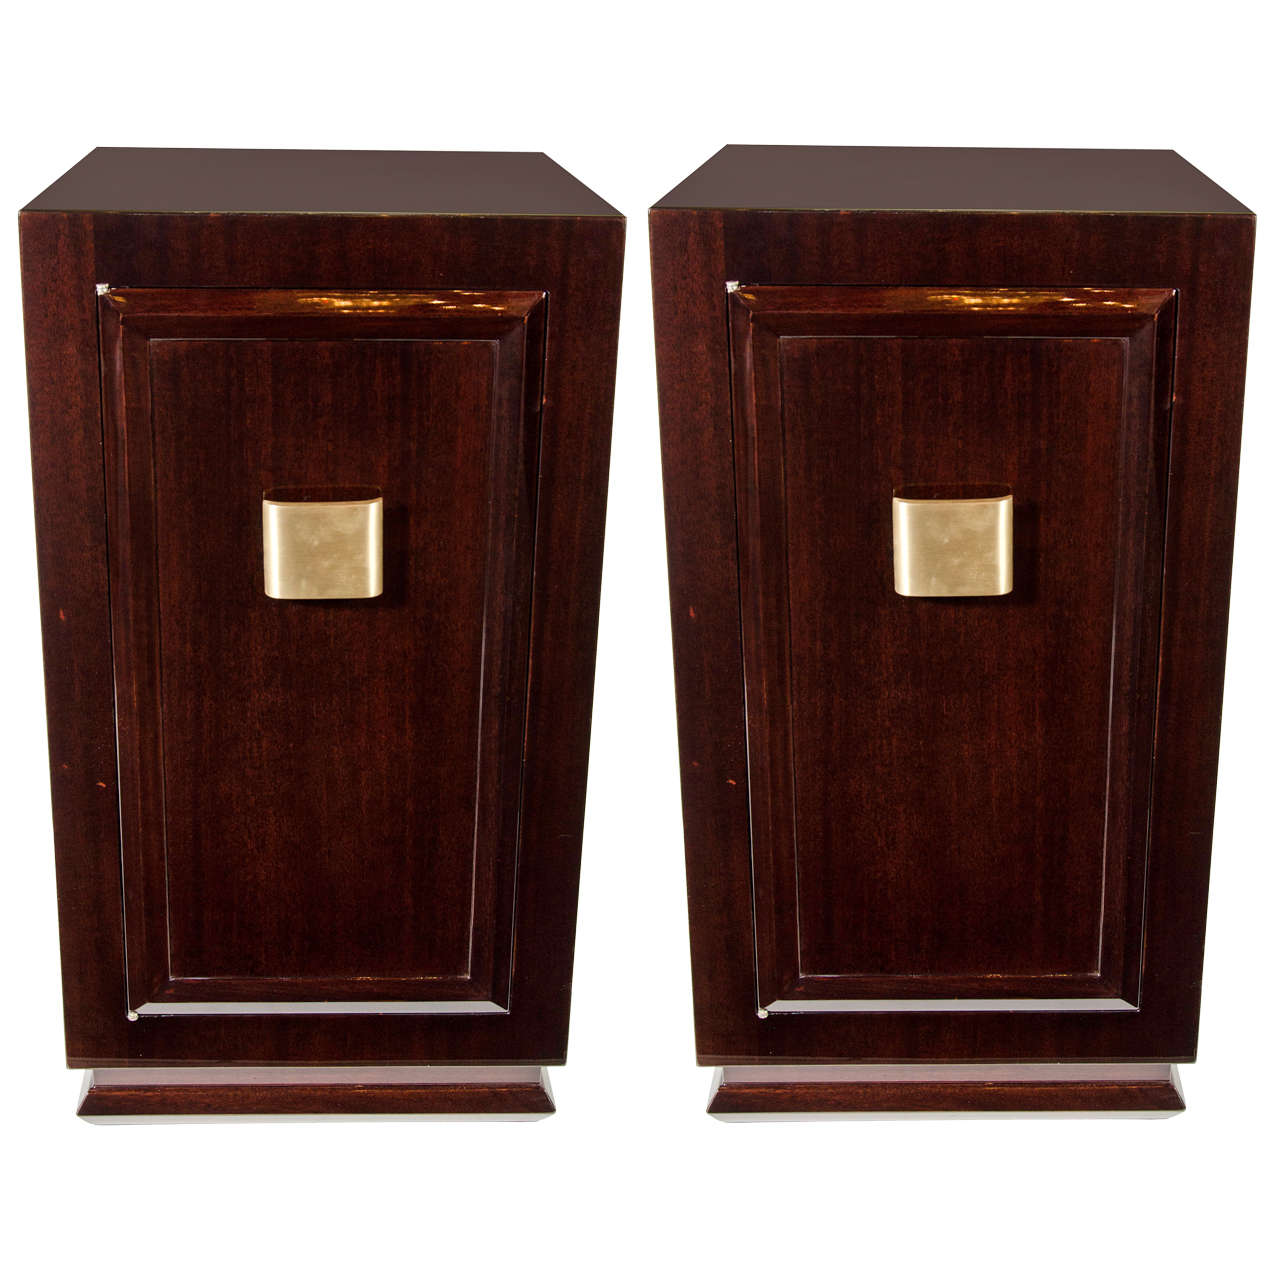 Pair of Stunning Mid-Century End Tables/Cabinets in the Manner of James Mont